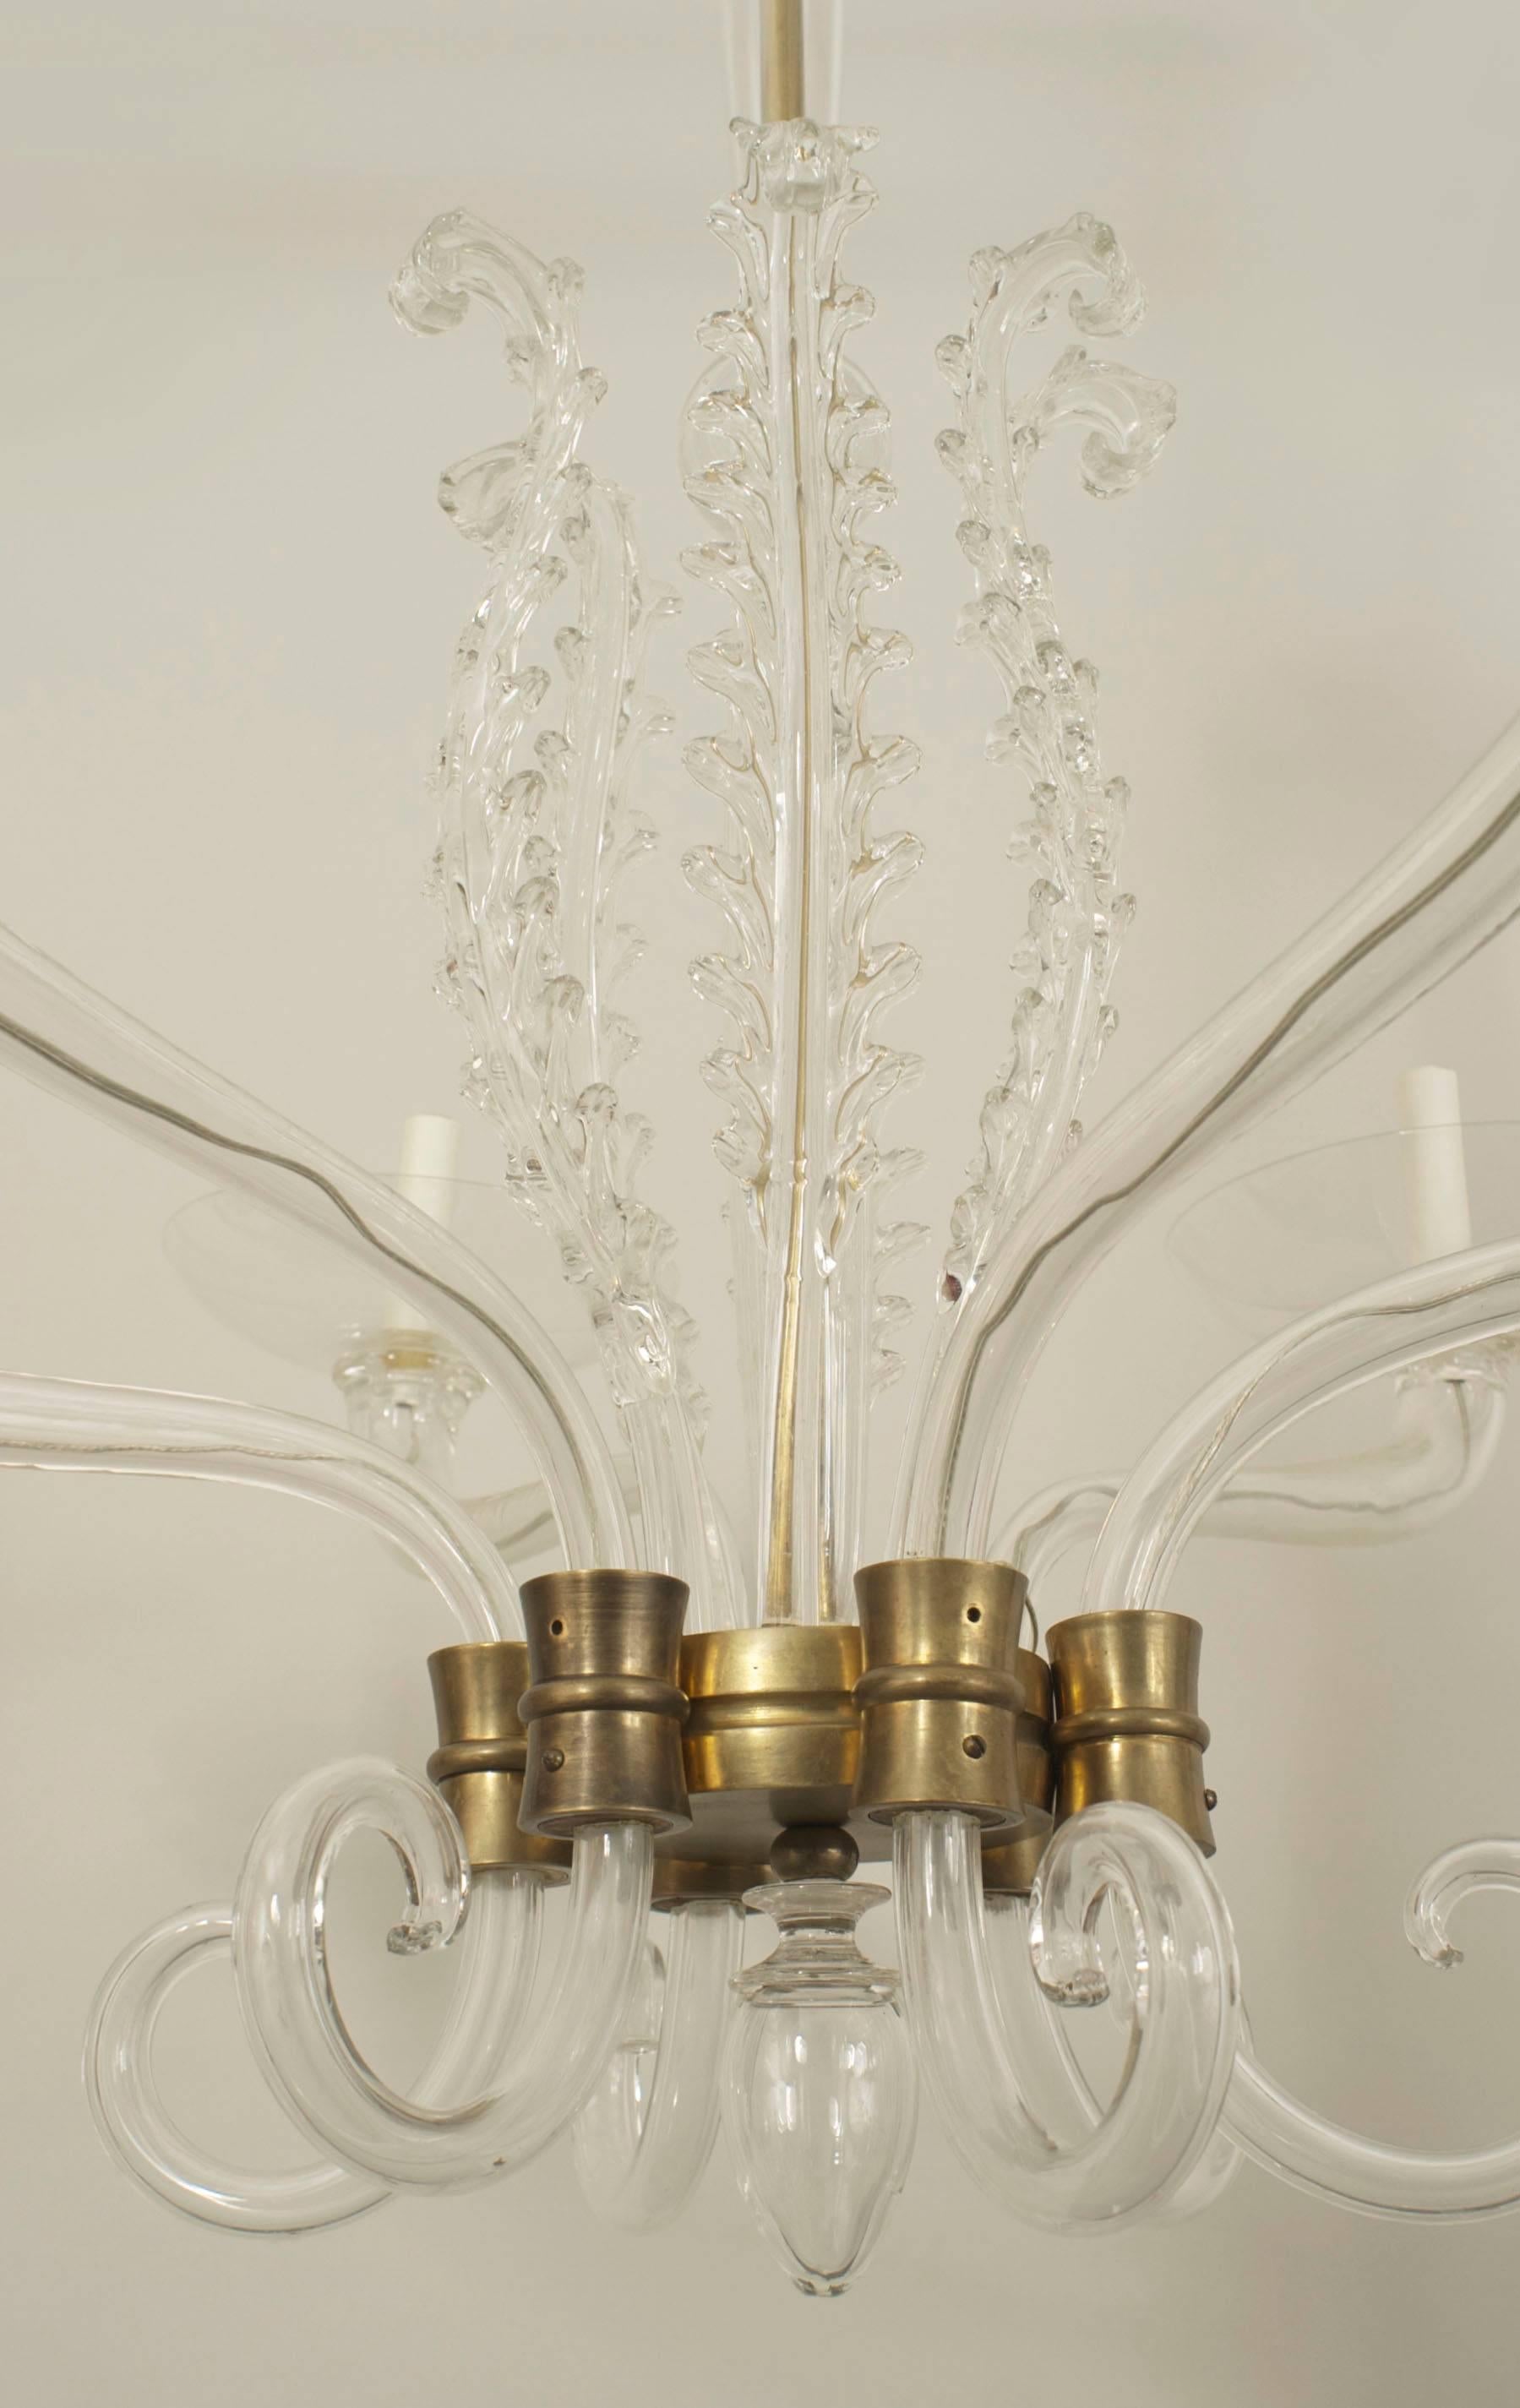 Italian 1940s clear glass chandelier with six scroll arms holding bowl shades connected with a bronze frame and a centerpost surrounded by vertical feathers with a finial bottom (by Venini).

 